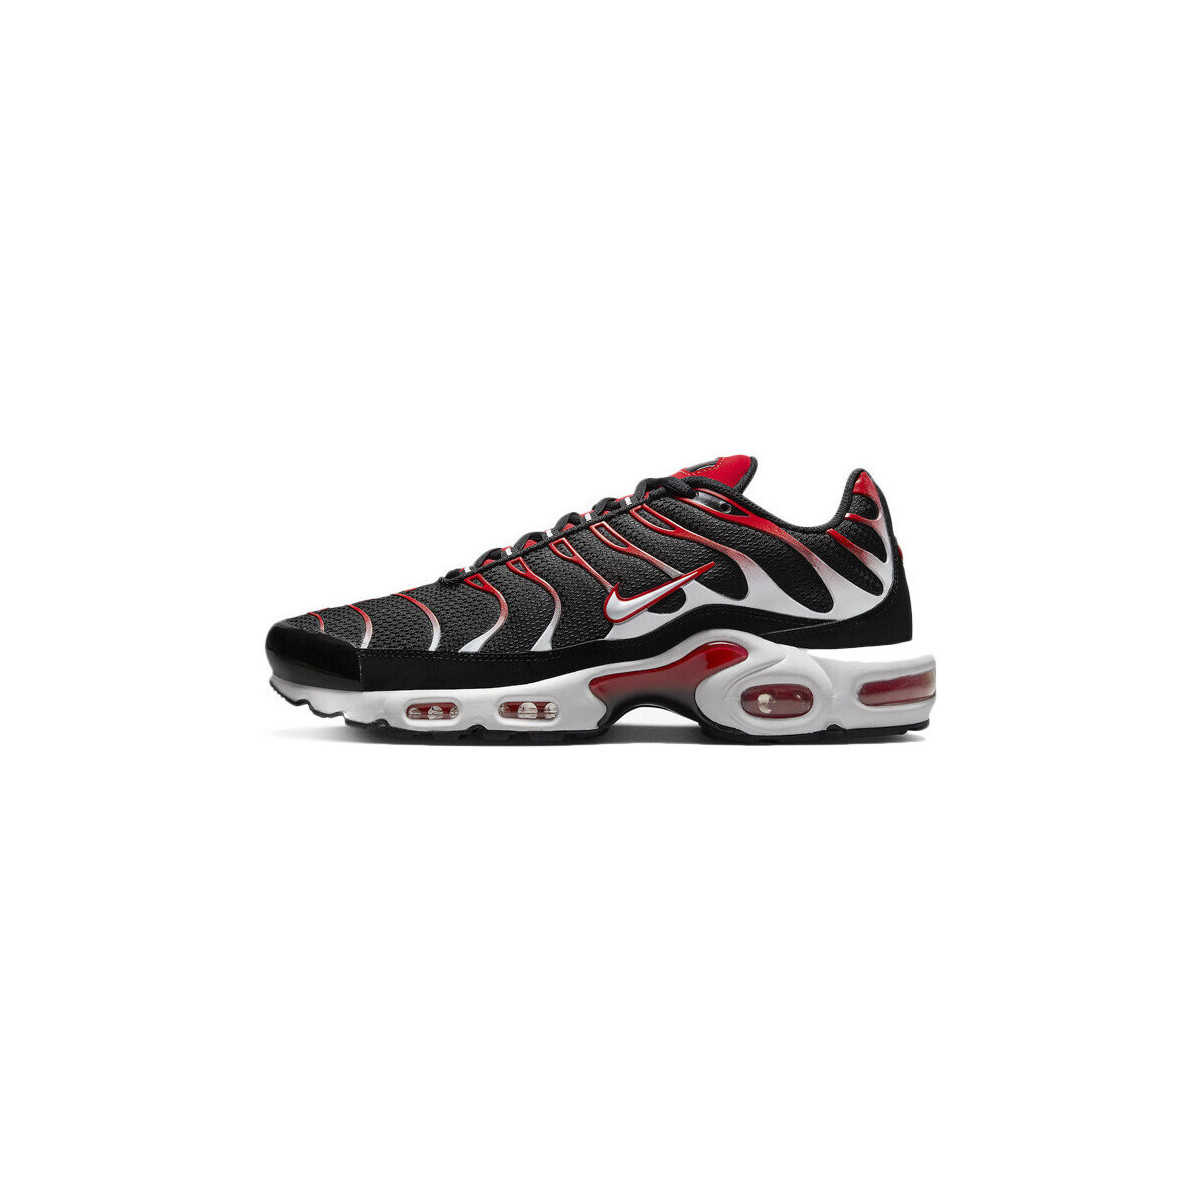 Nike Rouge AIR MAX PLUS dQ6mm9aa